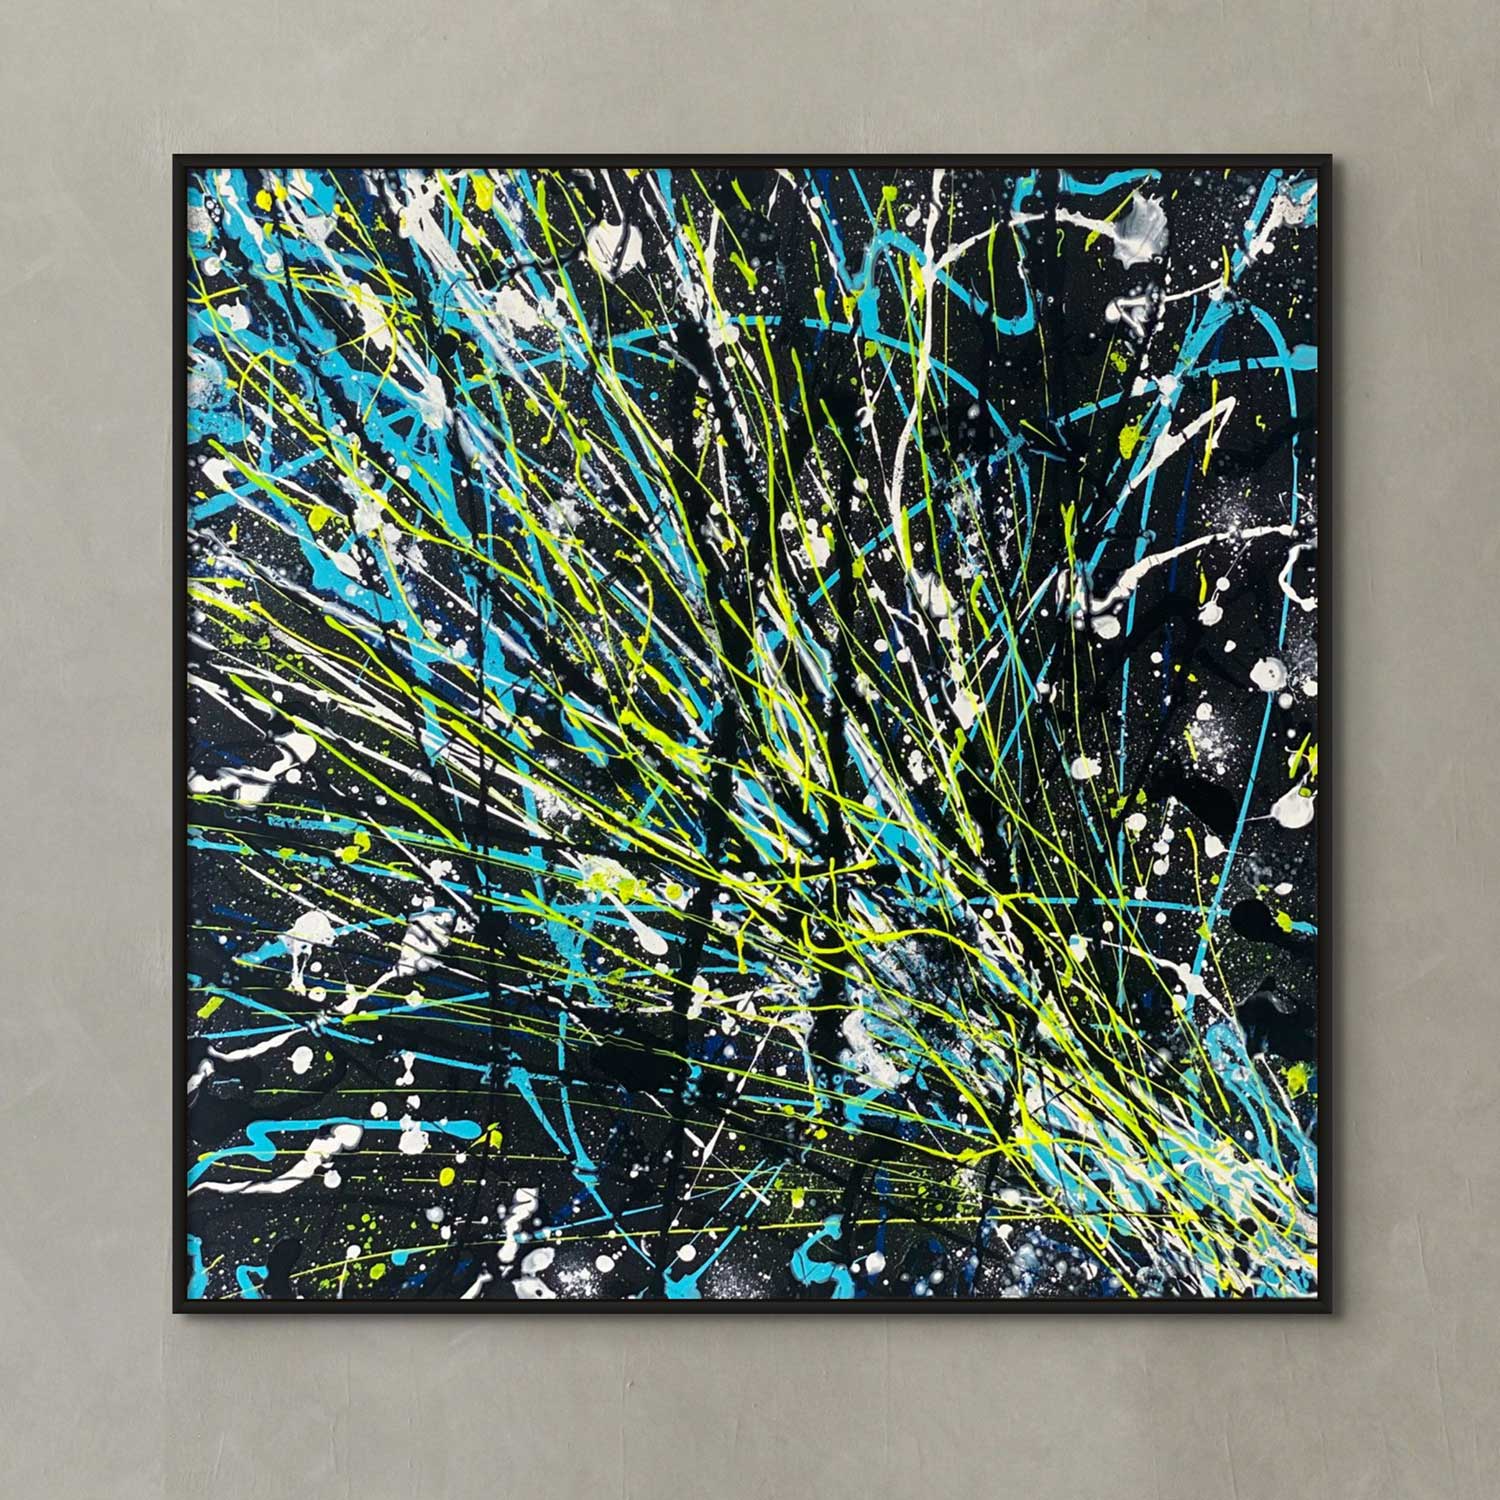 'Comet' Original Abstract Painting On canvas with Balck Float Frame seen Hanging on Concrete Wall. Pianted by Bridget Bradley, Abstract Expressionist Artist, Queensland Australia